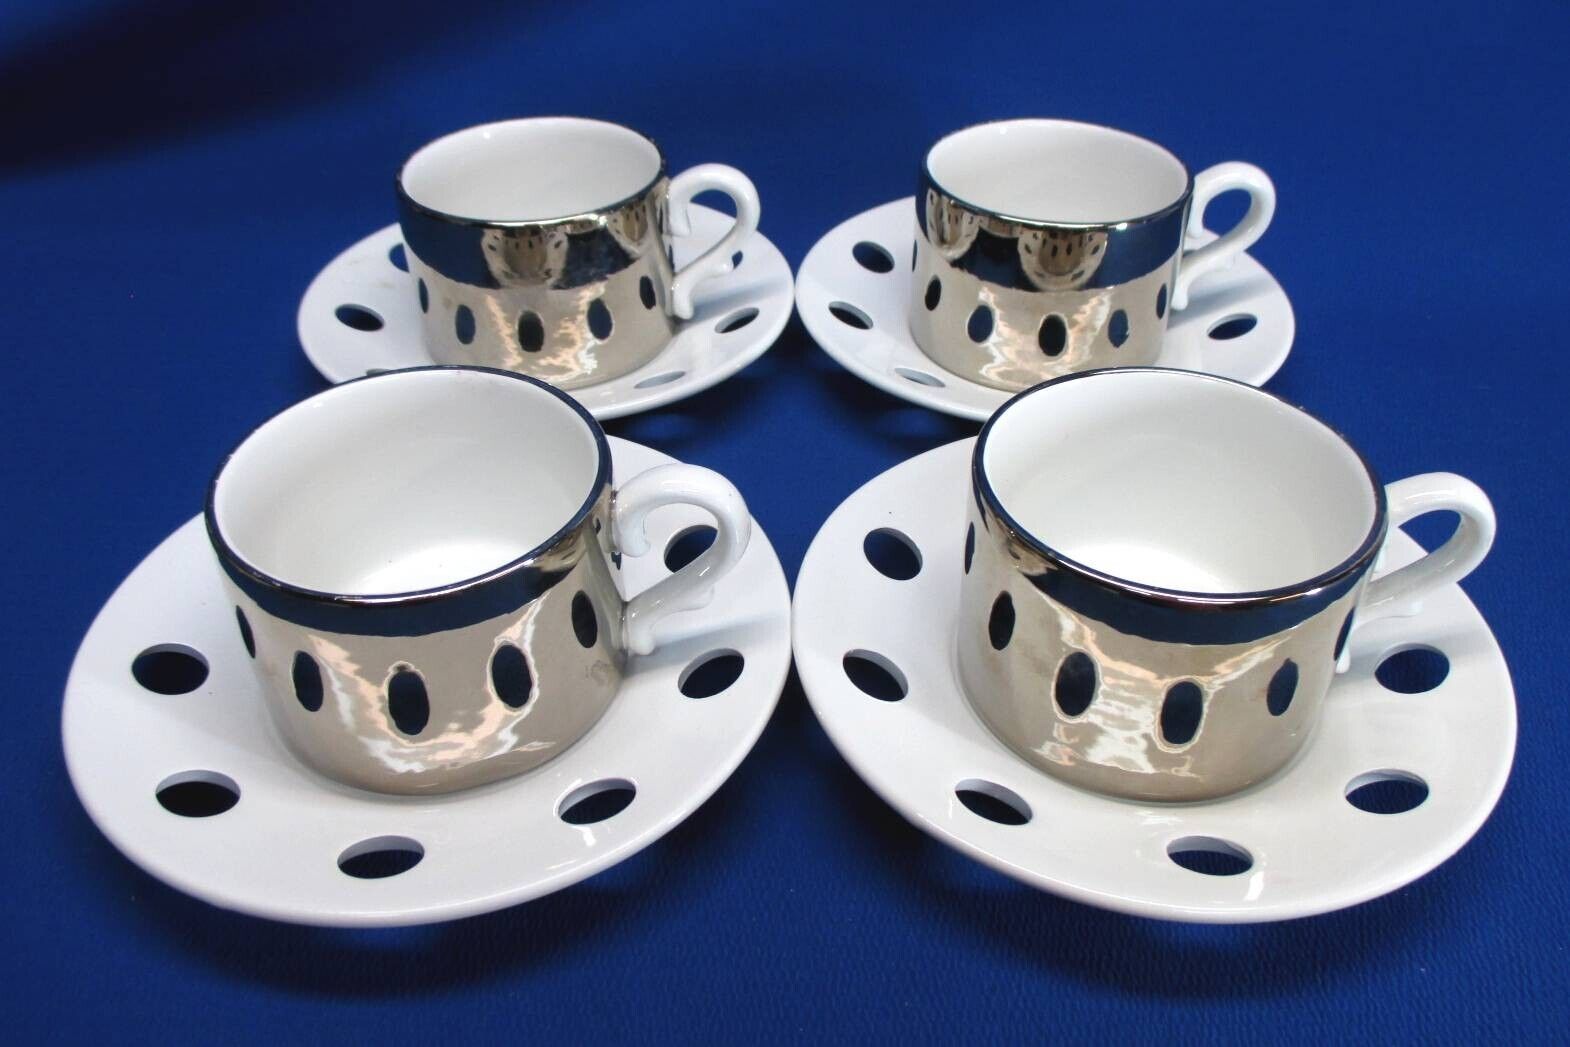 SET OF 4 MOD CHROME ESTE ITALY CUPS & SAUCERS CUPS REFLECT OPEN HOLES IN SAUCER